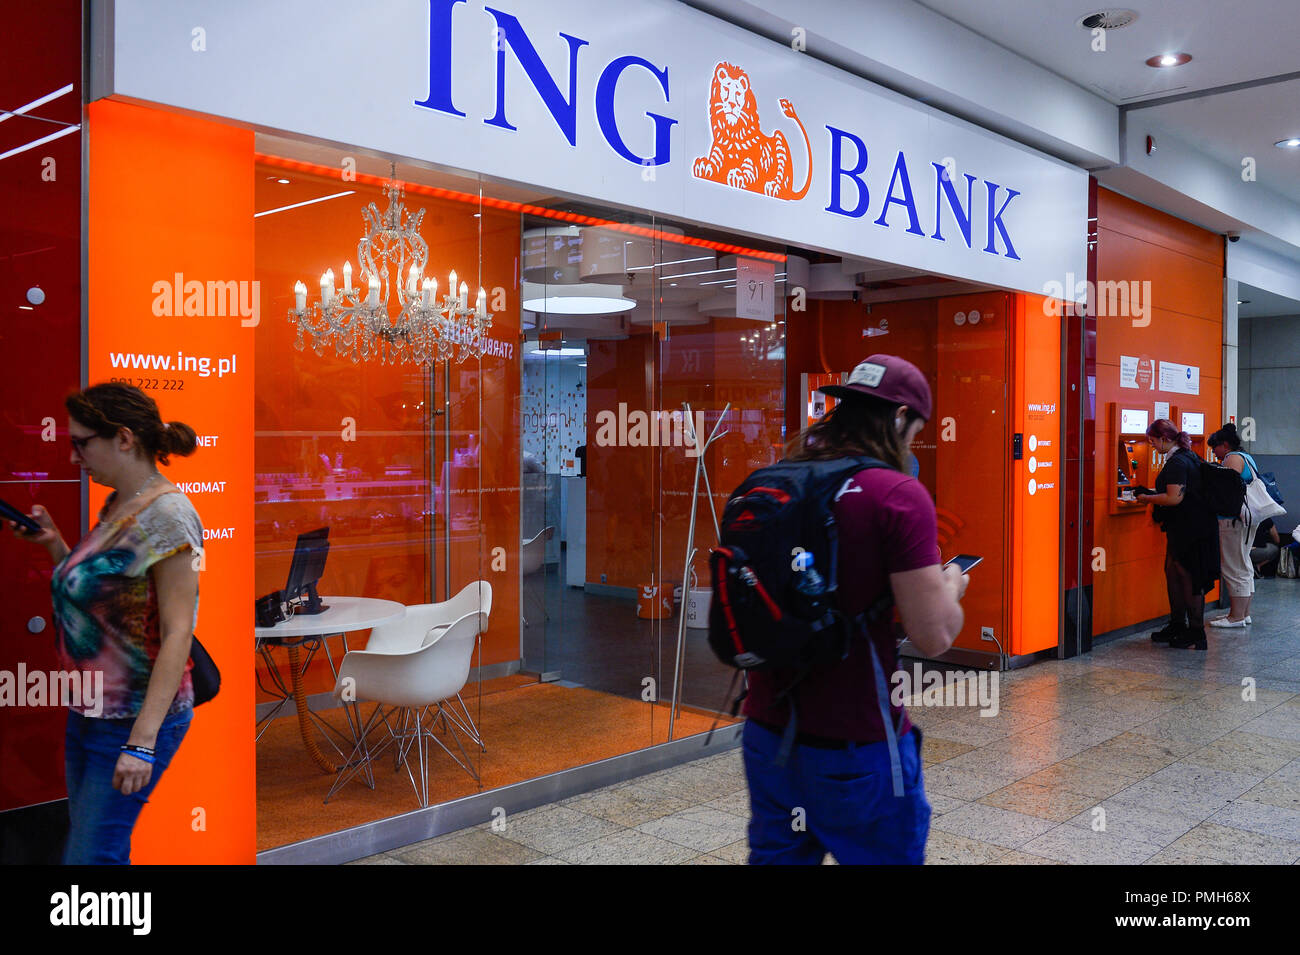 September 18, 2018 - Krakow, Poland - People seen walking by an Ing Bank  branch. (Credit Image: © Omar Marques/SOPA Images via ZUMA Wire Stock Photo  - Alamy